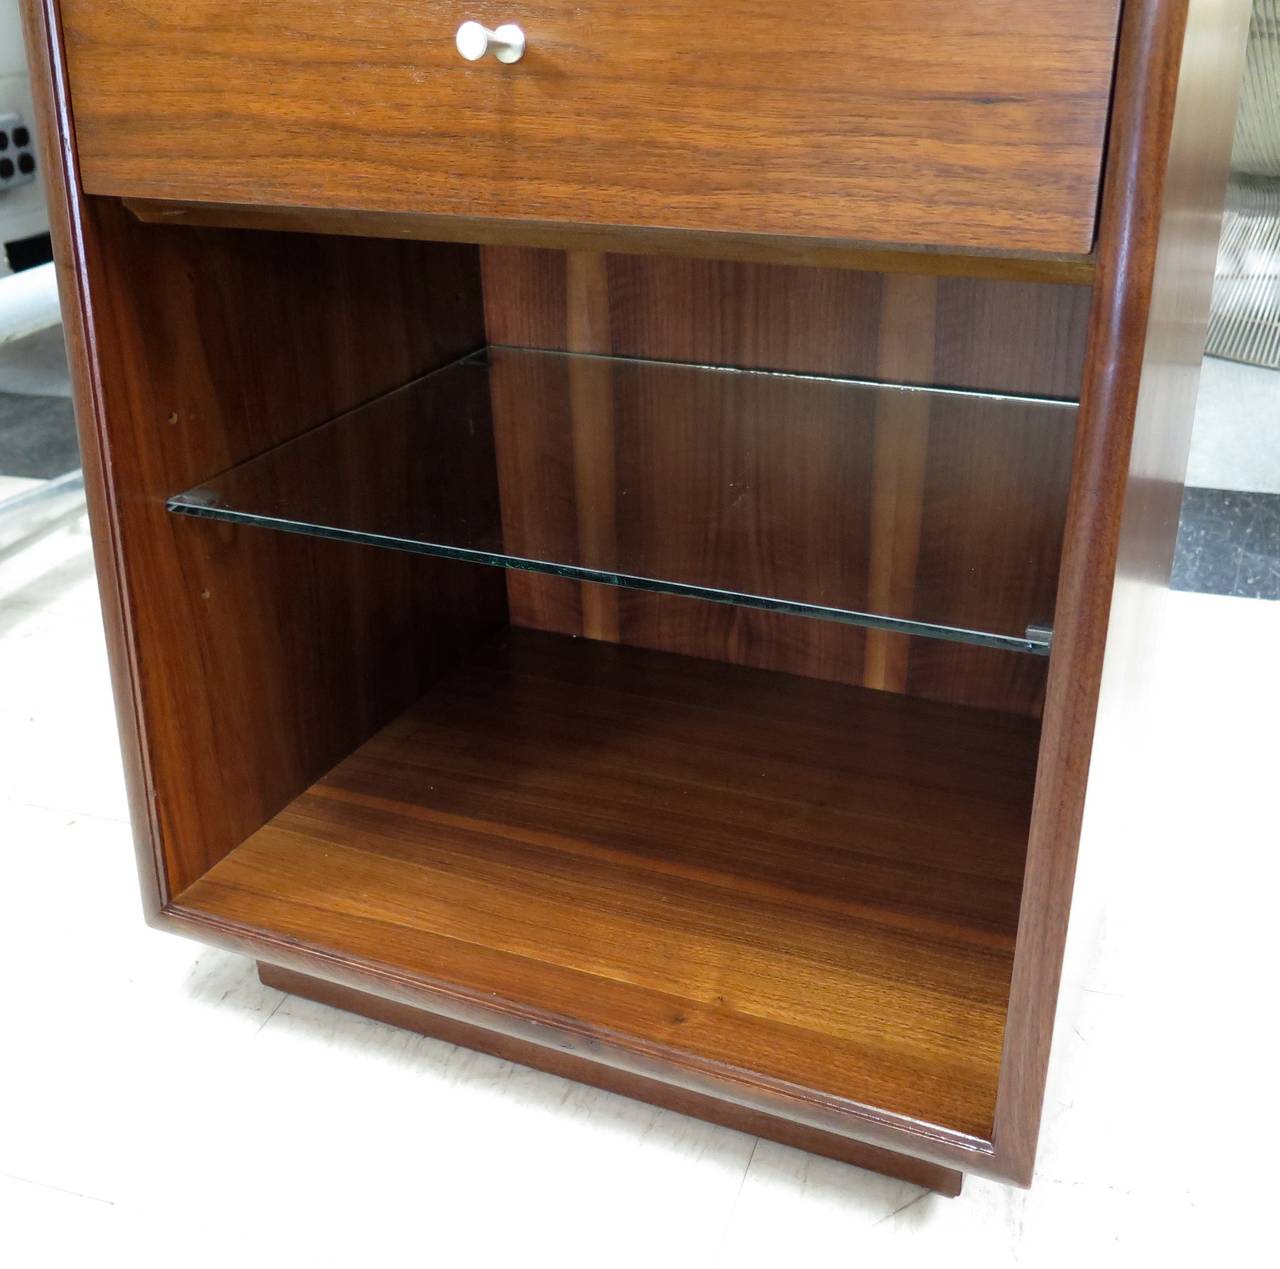 Restored. Walnut wood construction. Glass shelf. New knobs. Few small dings on edge. Top measures 14" deep, bottom 15.5" deep. Nice looking stands.